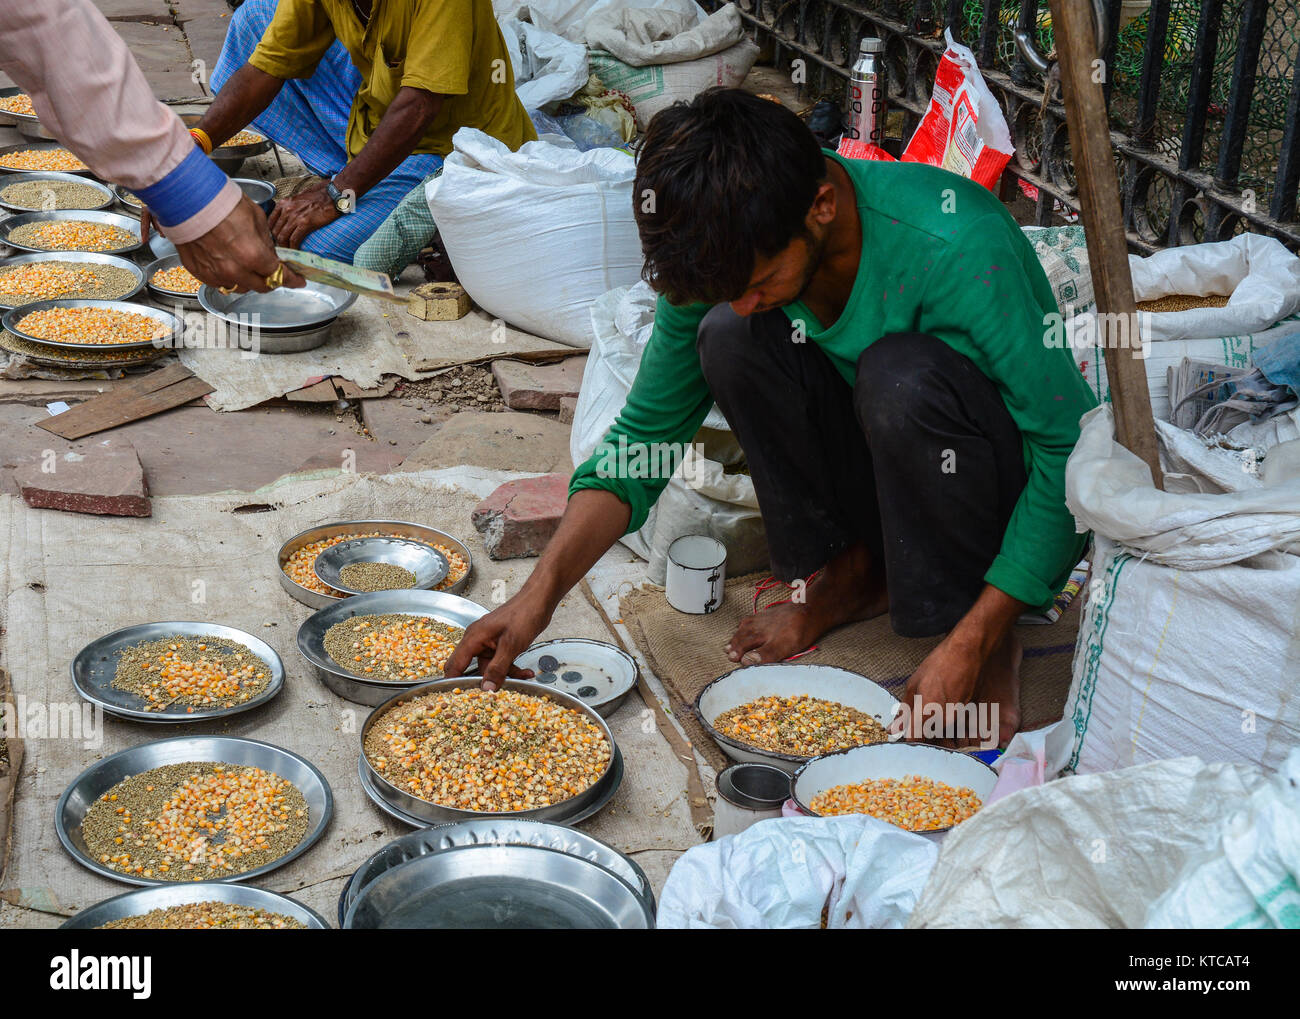 Delhi, India - Jul 26, 2015. Vendors selling bird foods at the old market in Delhi, India. According to the 2011 census of India, the population of De Stock Photo